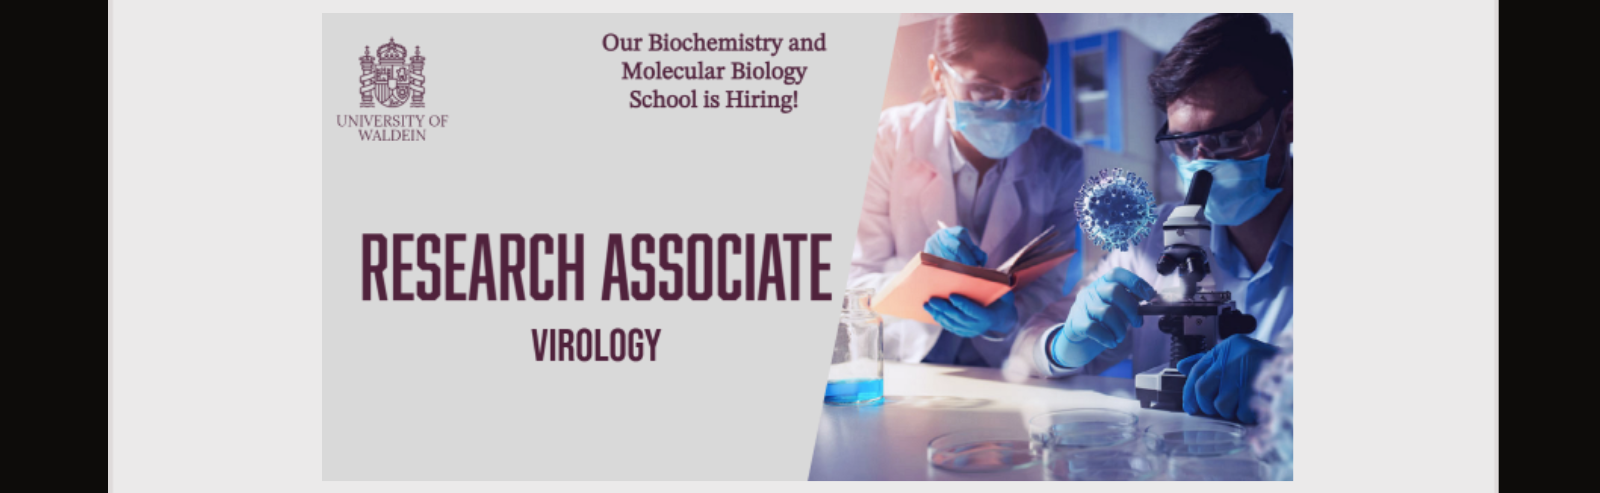 Second banner on the tablet says "University of Waldein. Our Biochemistry and Molecular Biology School is Hiring! Research Associate, Virology".